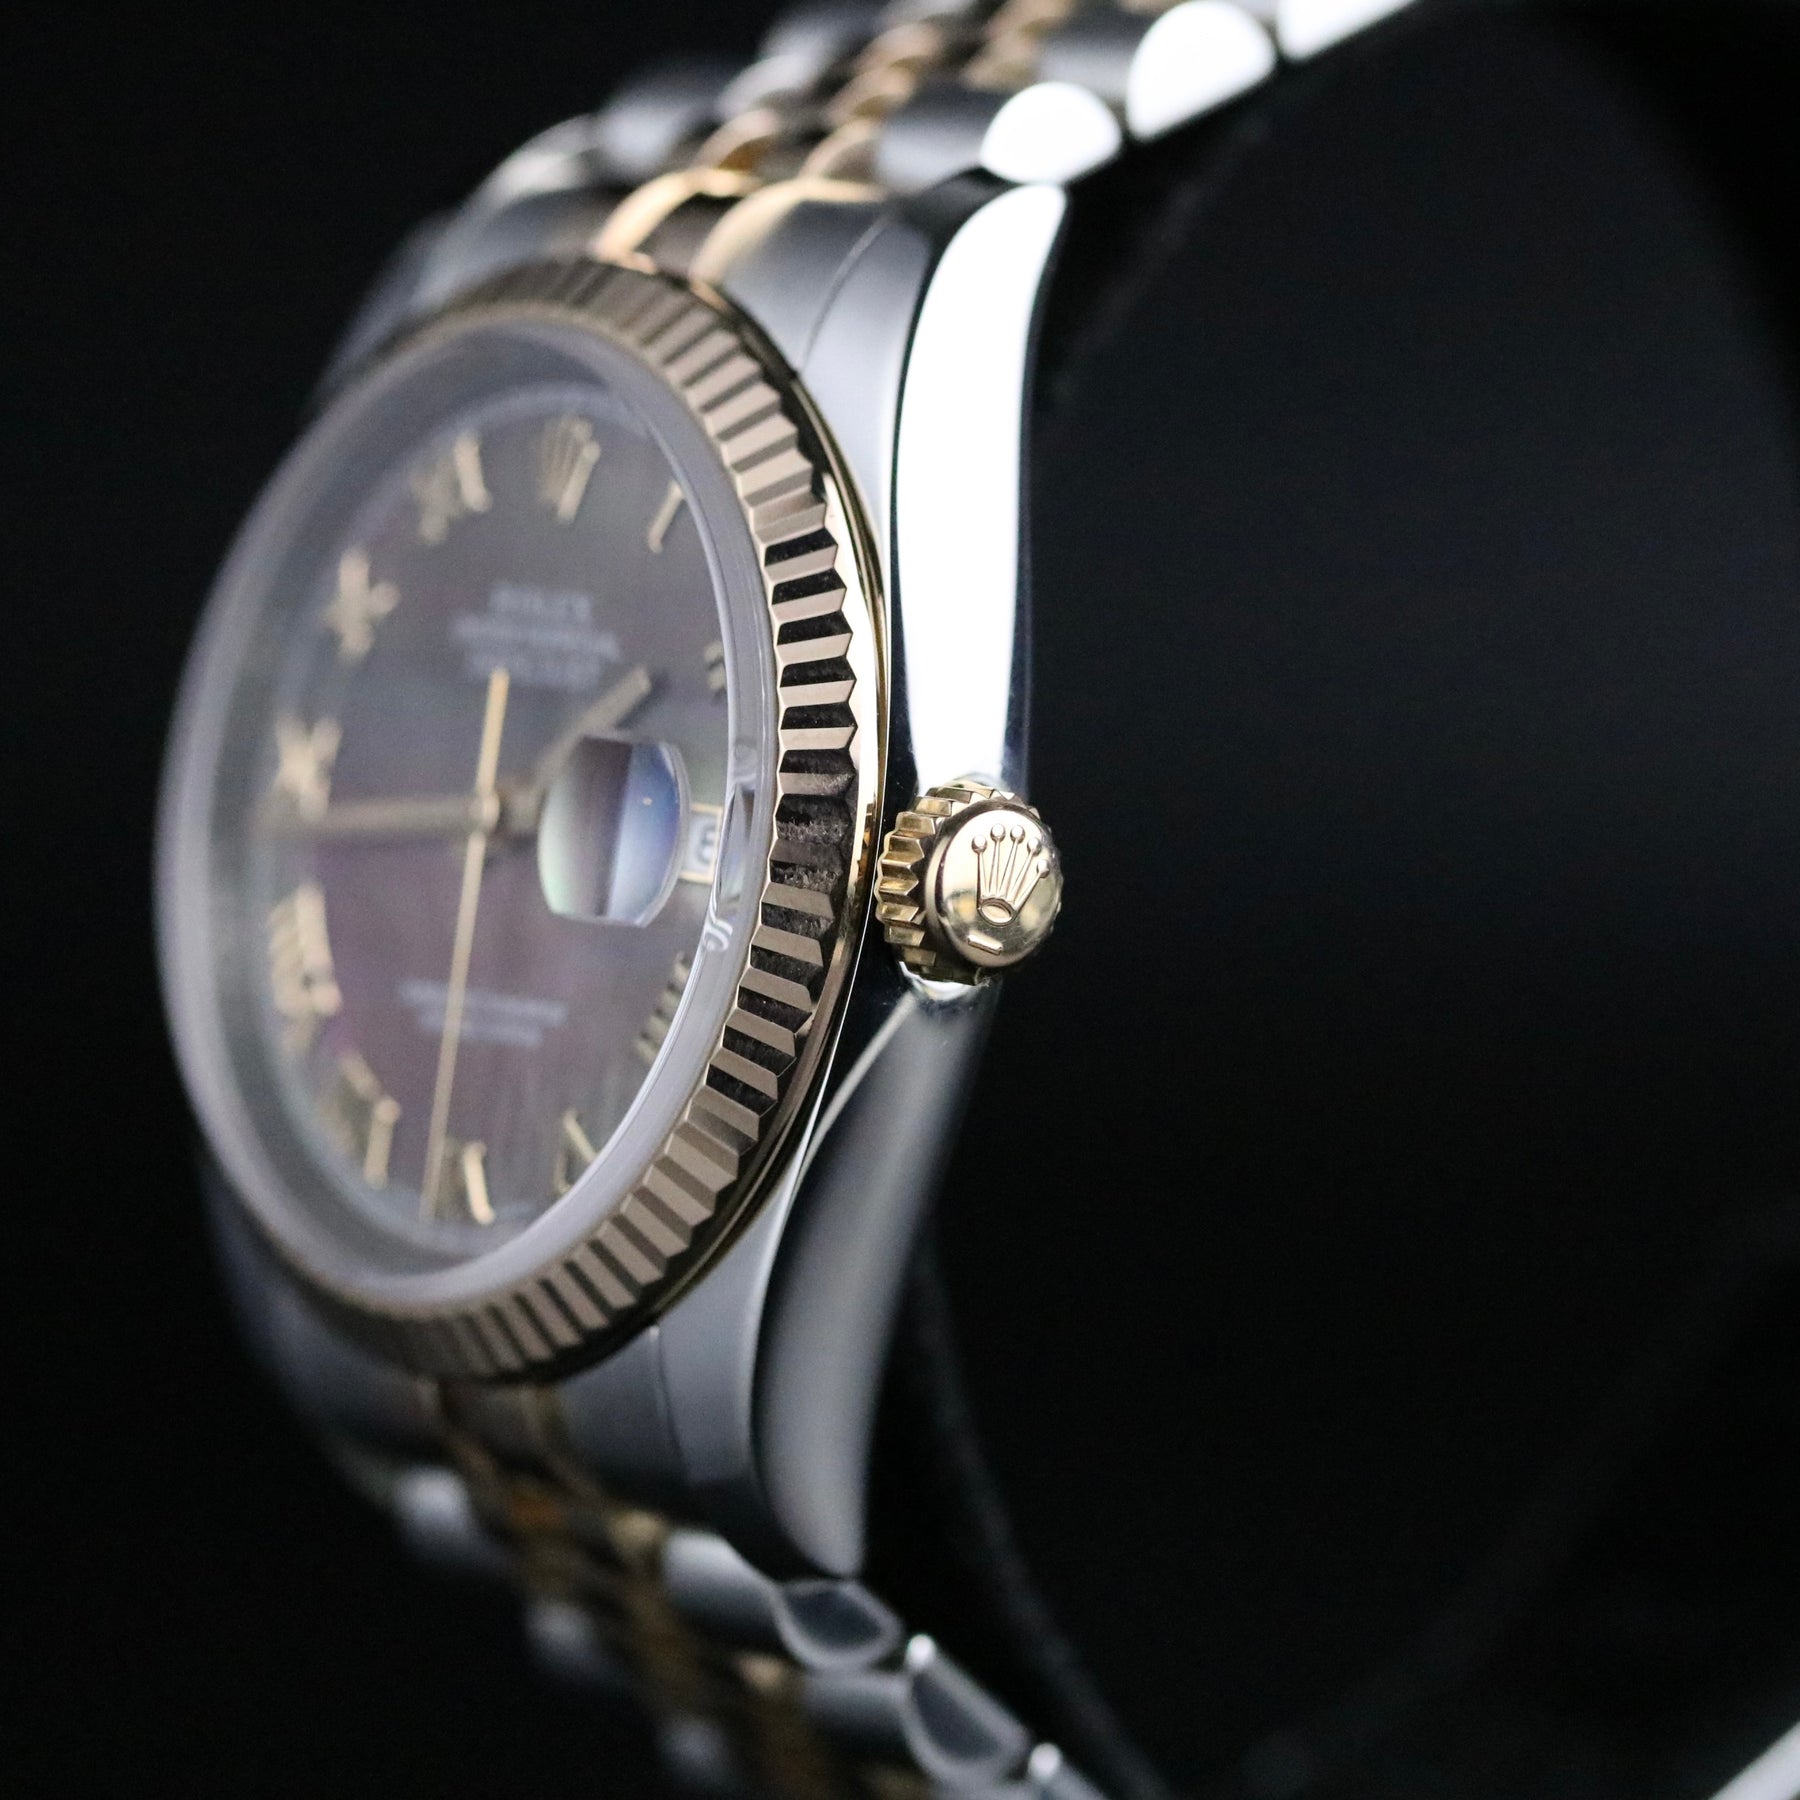 2005 Rolex 116231 Datejust 36mm Factory MOP Dial with RSC